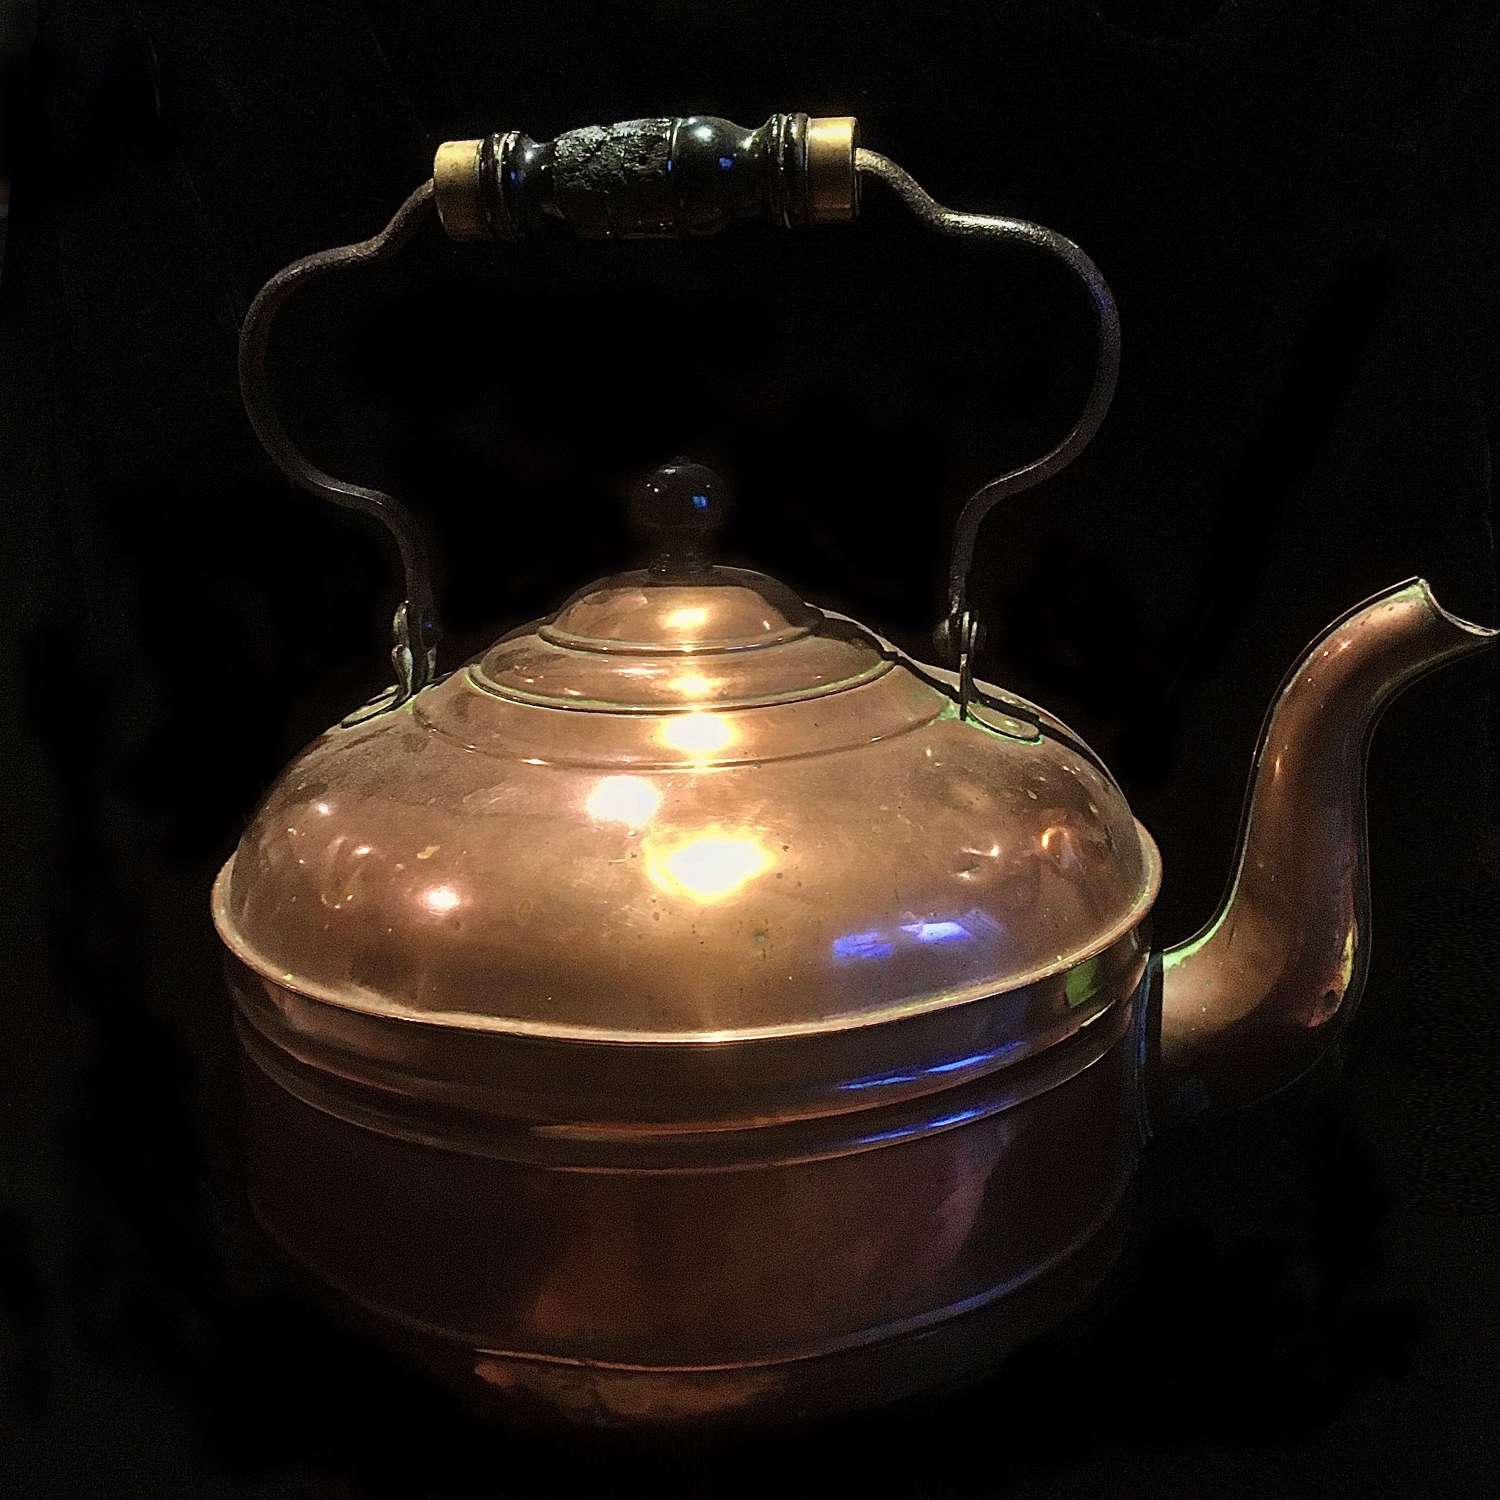 Very Large (14 Pint) Capacity Antique Copper Kettle